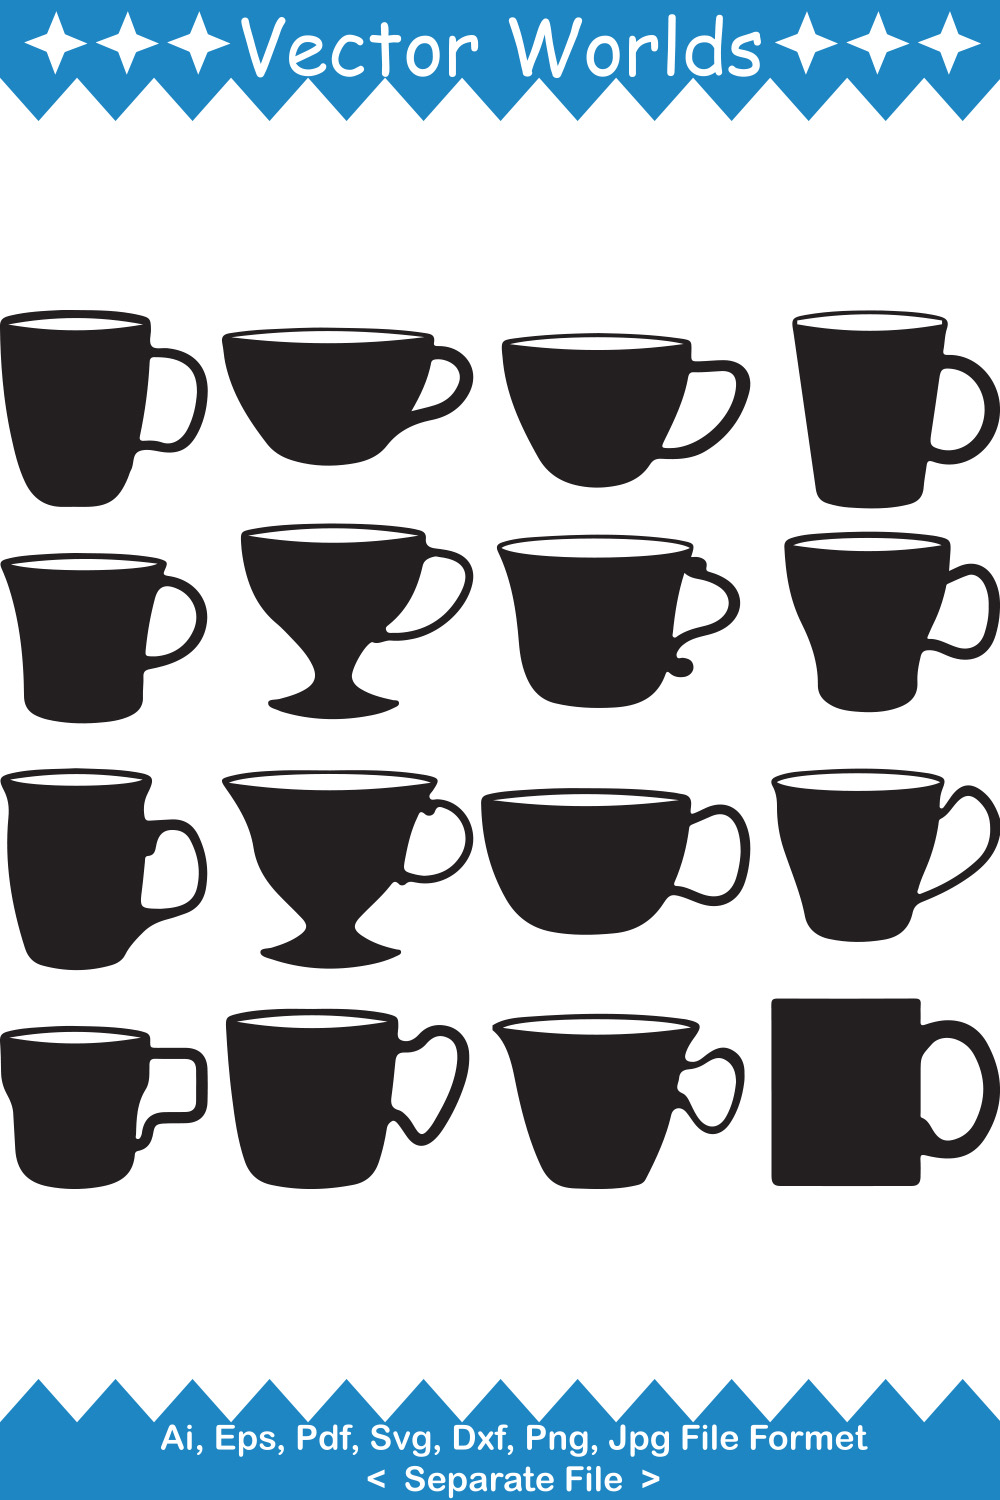 Set of beautiful vector images of coffee mug silhouettes